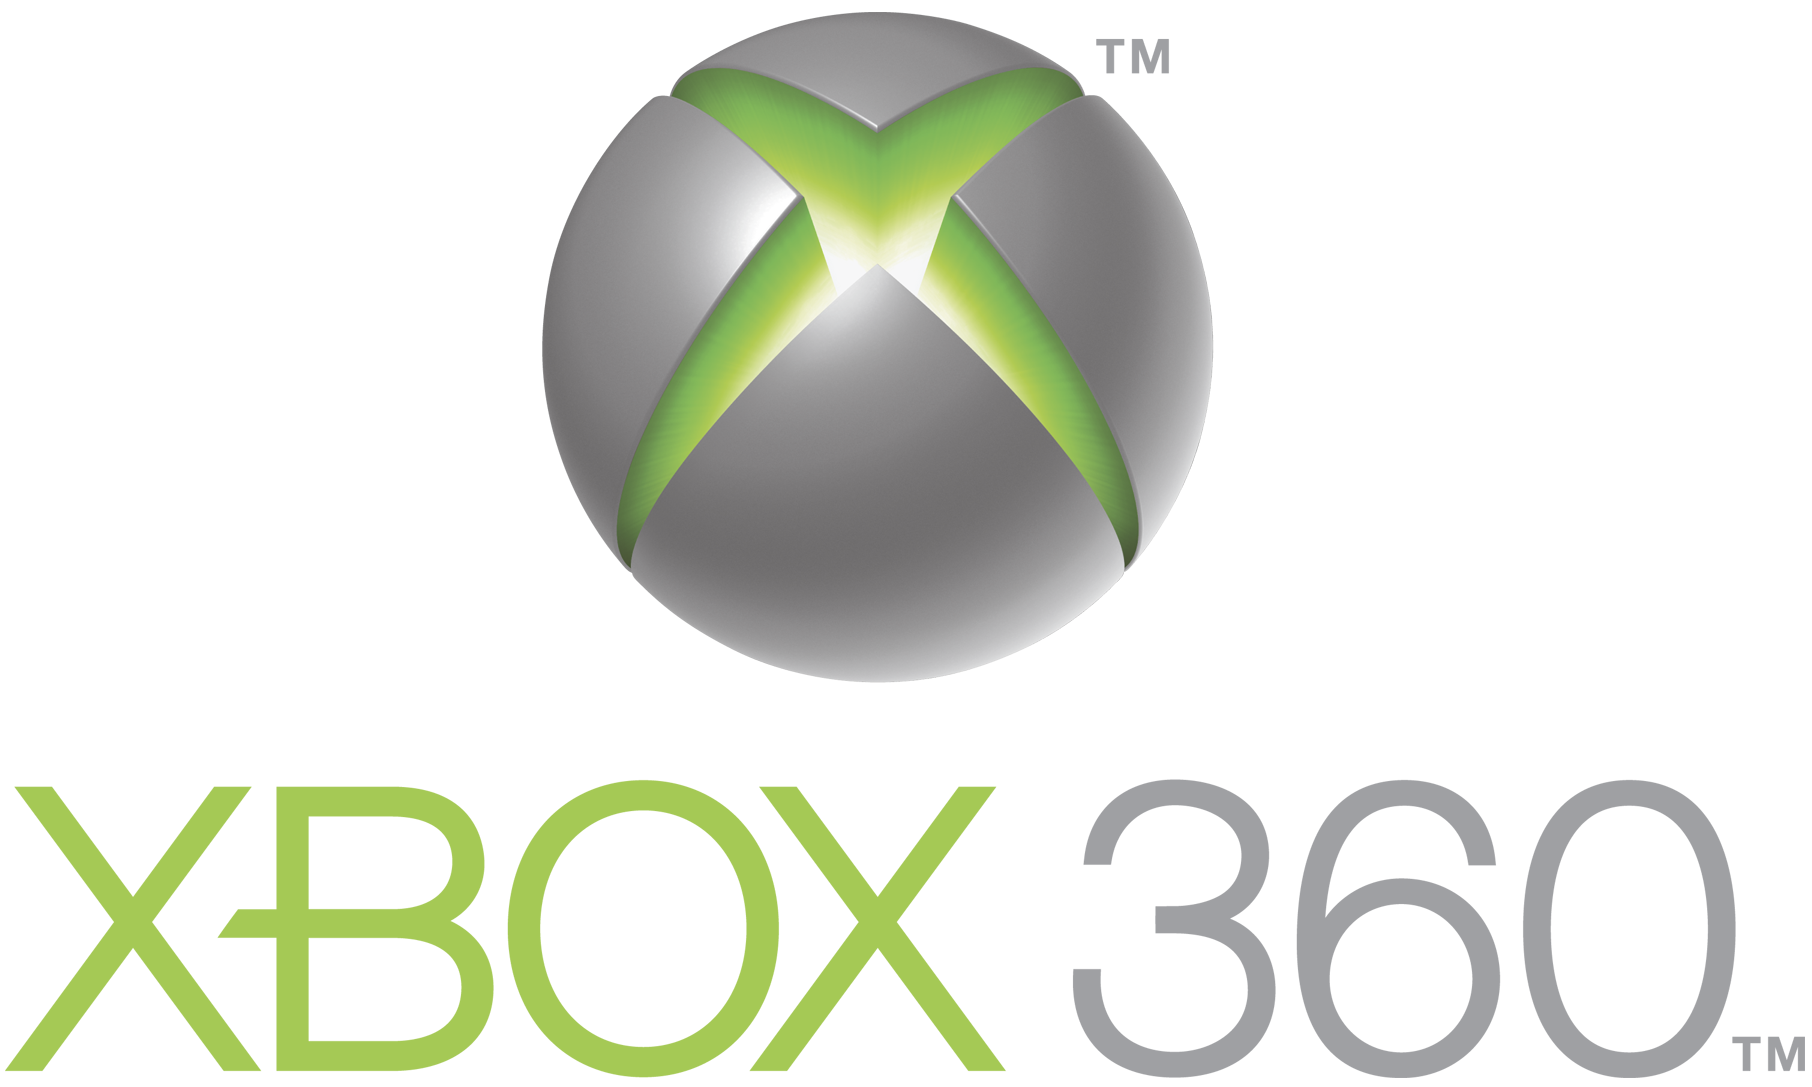 Xbox Logo png download - 1920*990 - Free Transparent Layers Of Fear png  Download. - CleanPNG / KissPNG